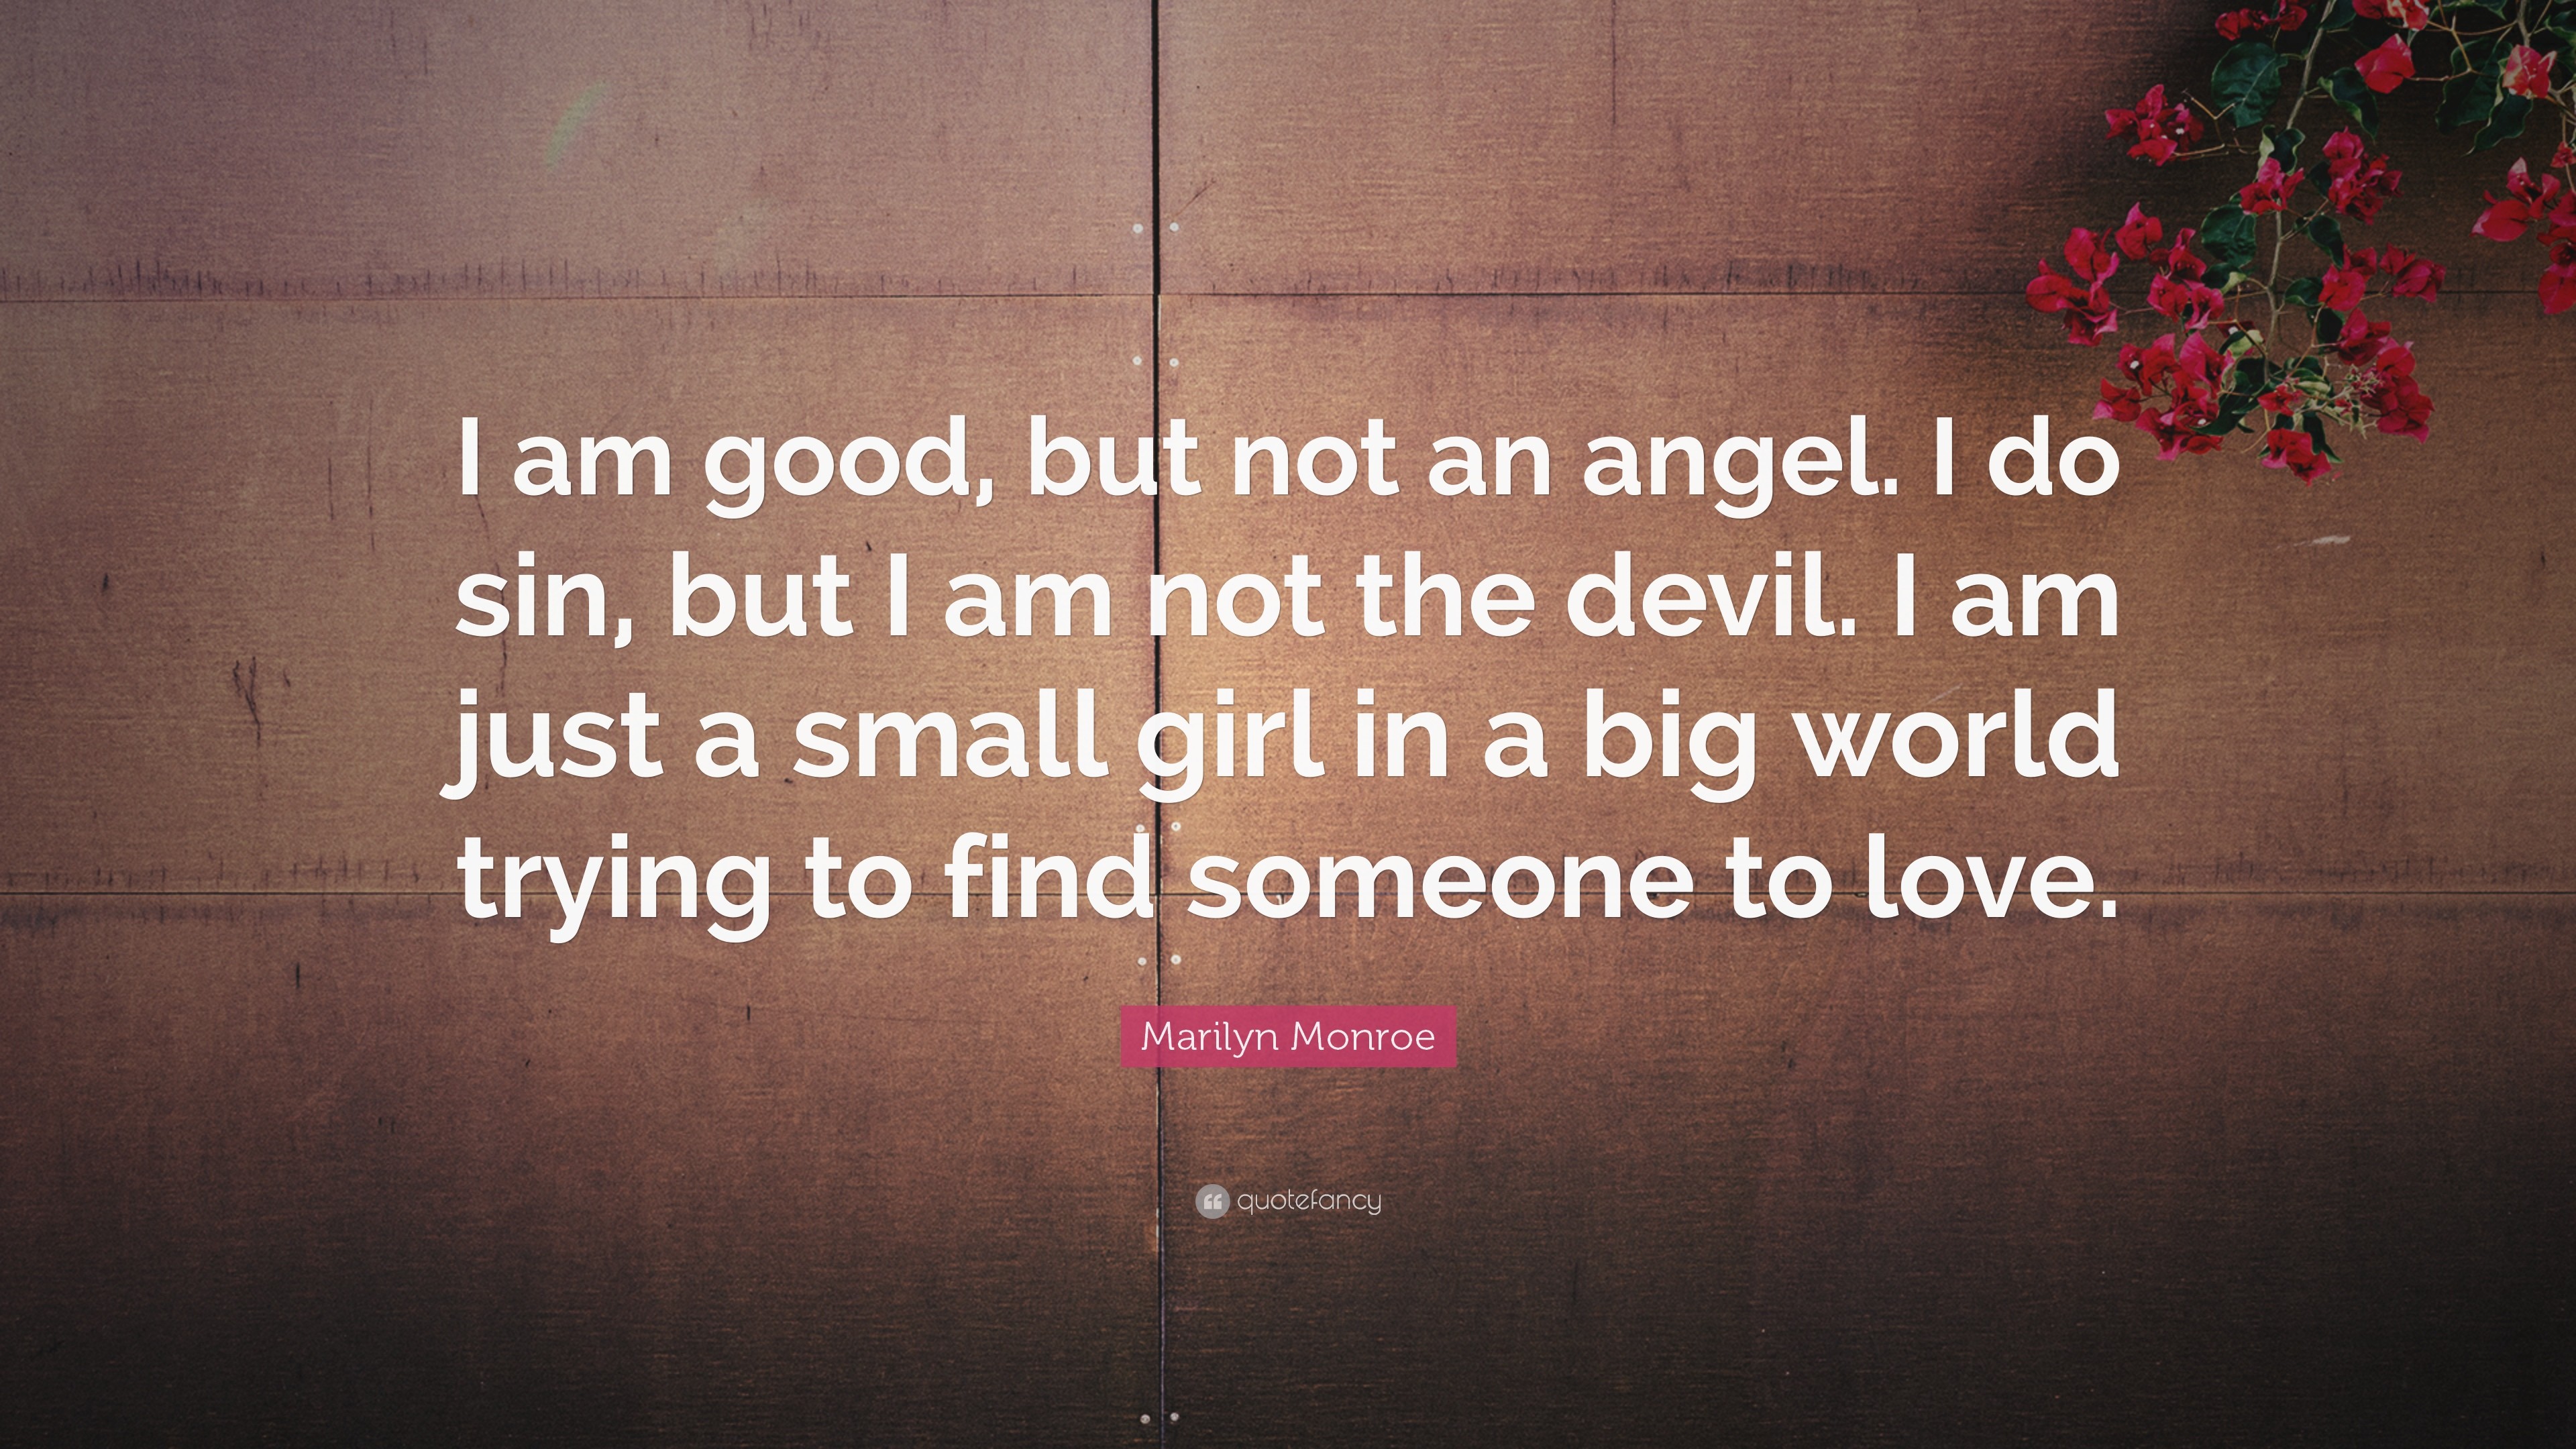 3840x2160 Love Quotes: “I am good, but not an angel. I do sin